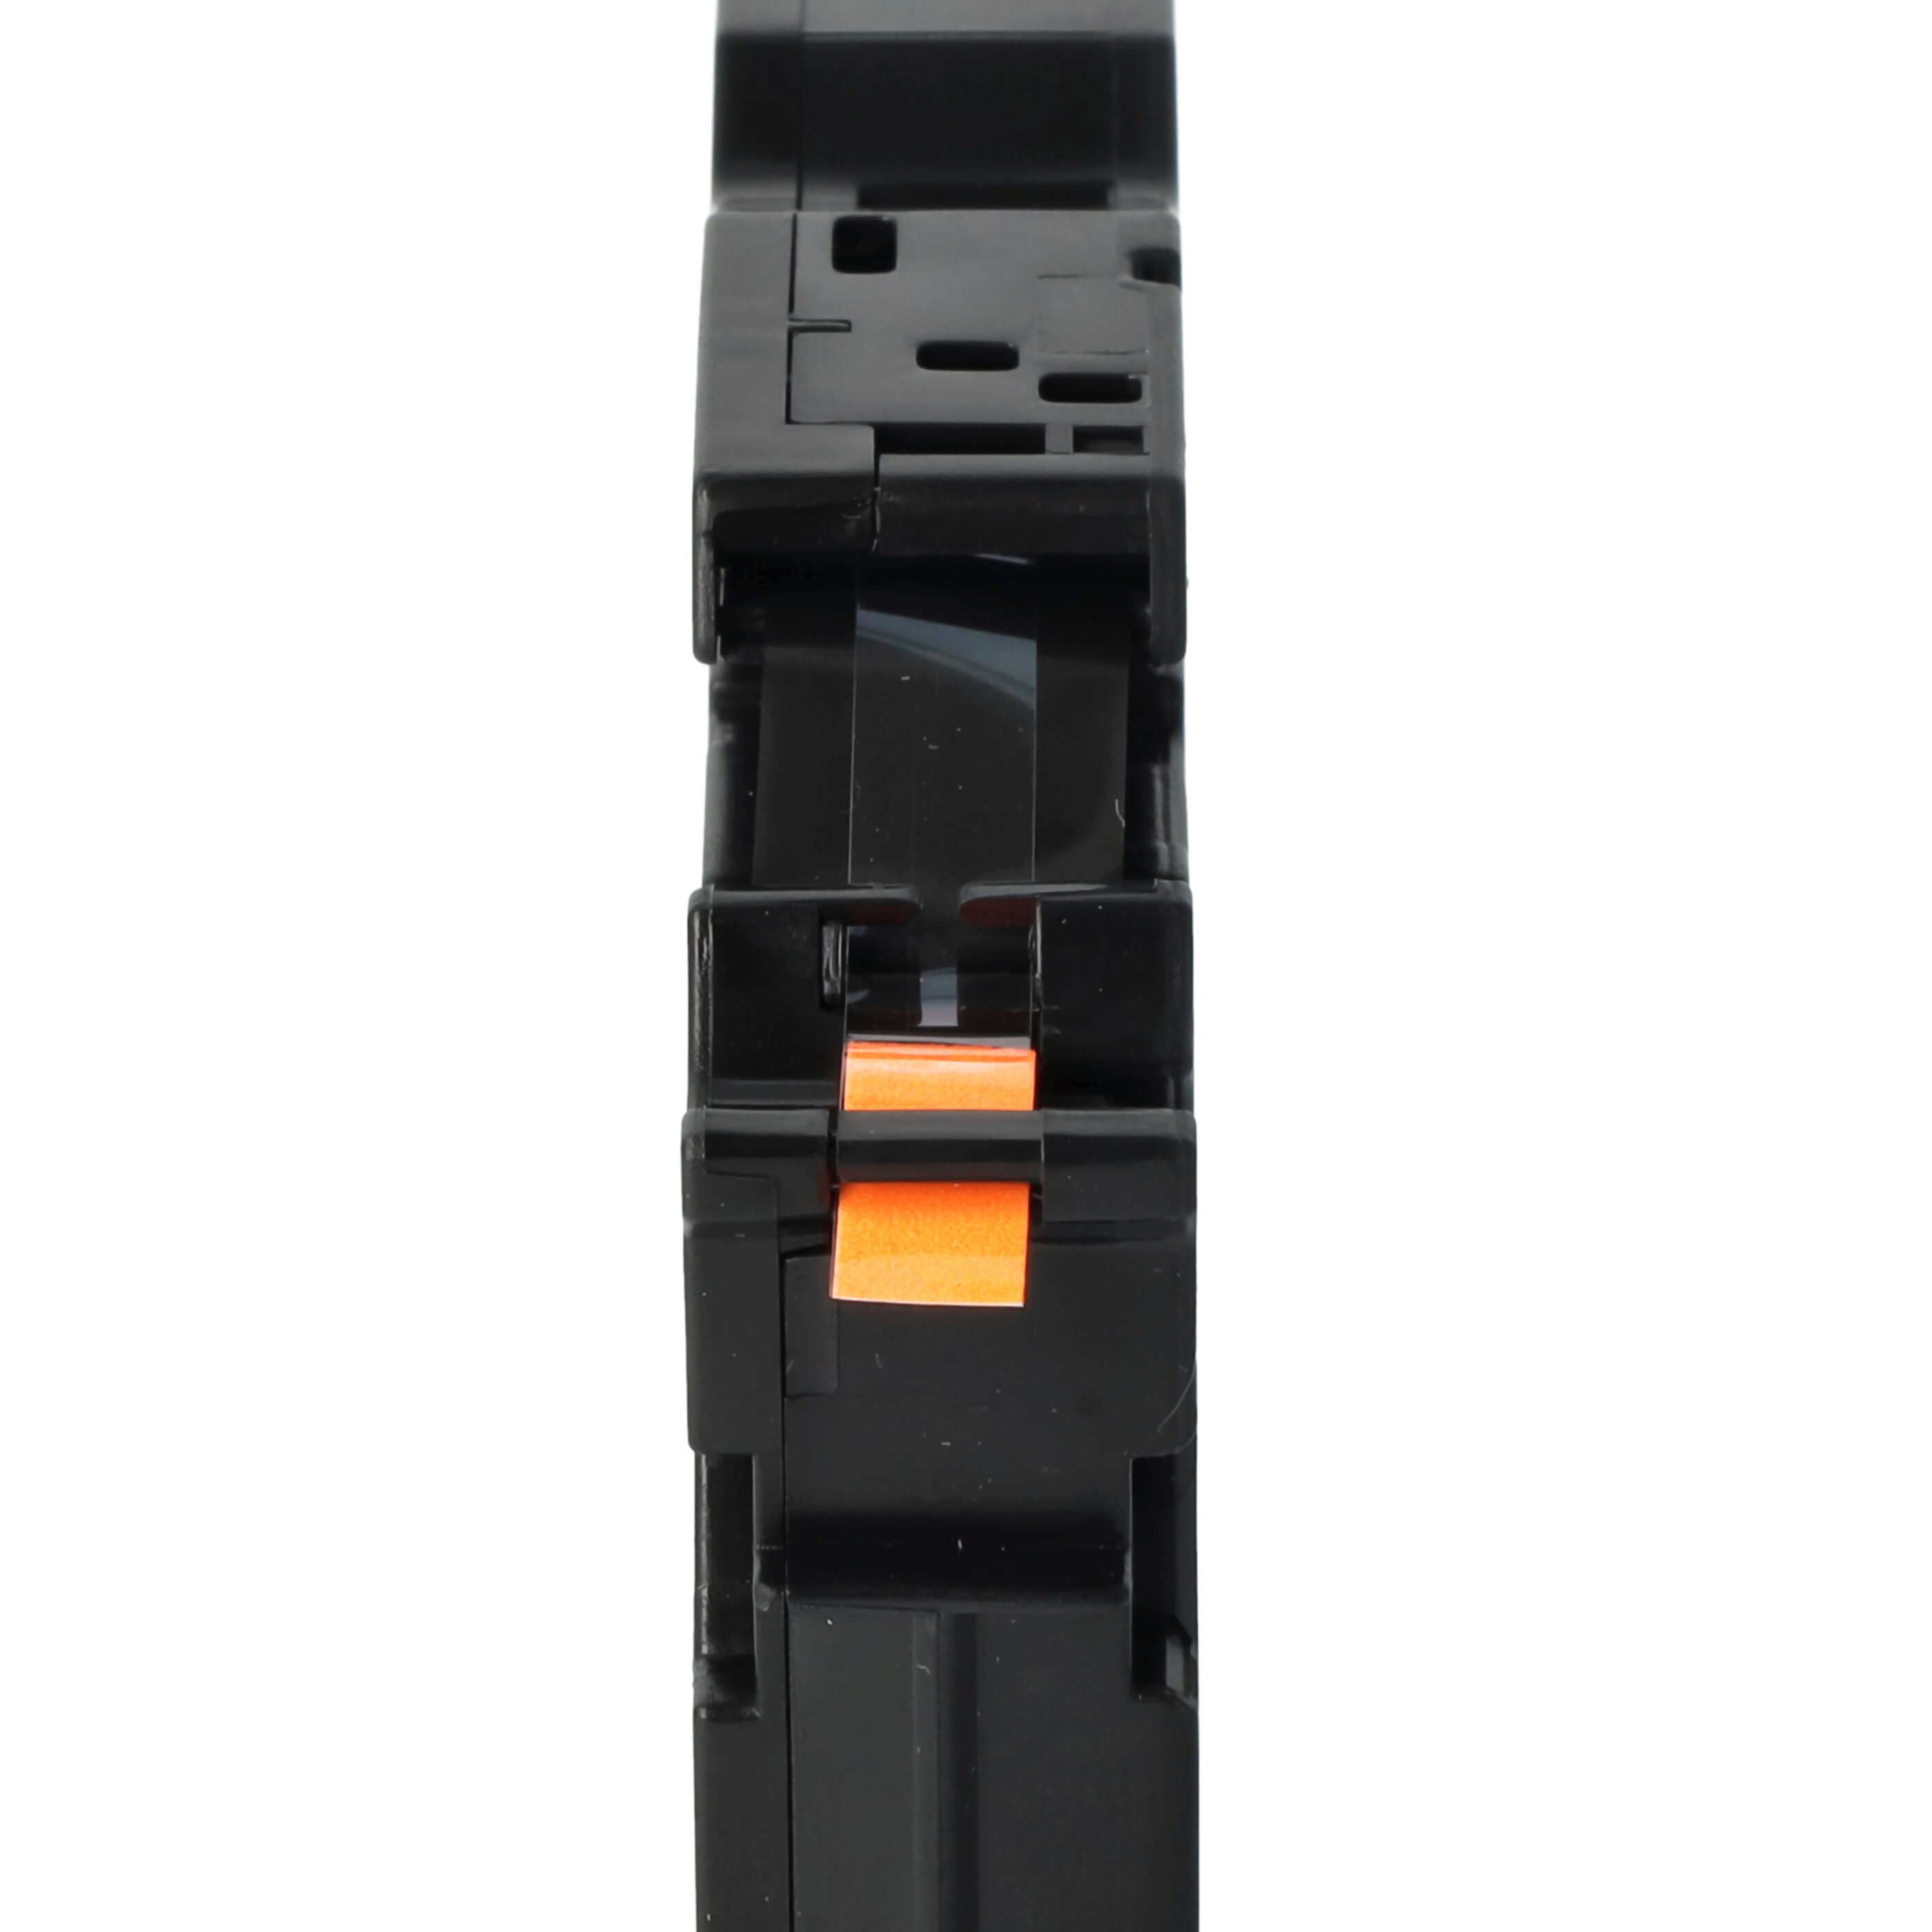 Label Tape as Replacement for Brother TZE-B11 - 6 mm Black to Neon-Orange